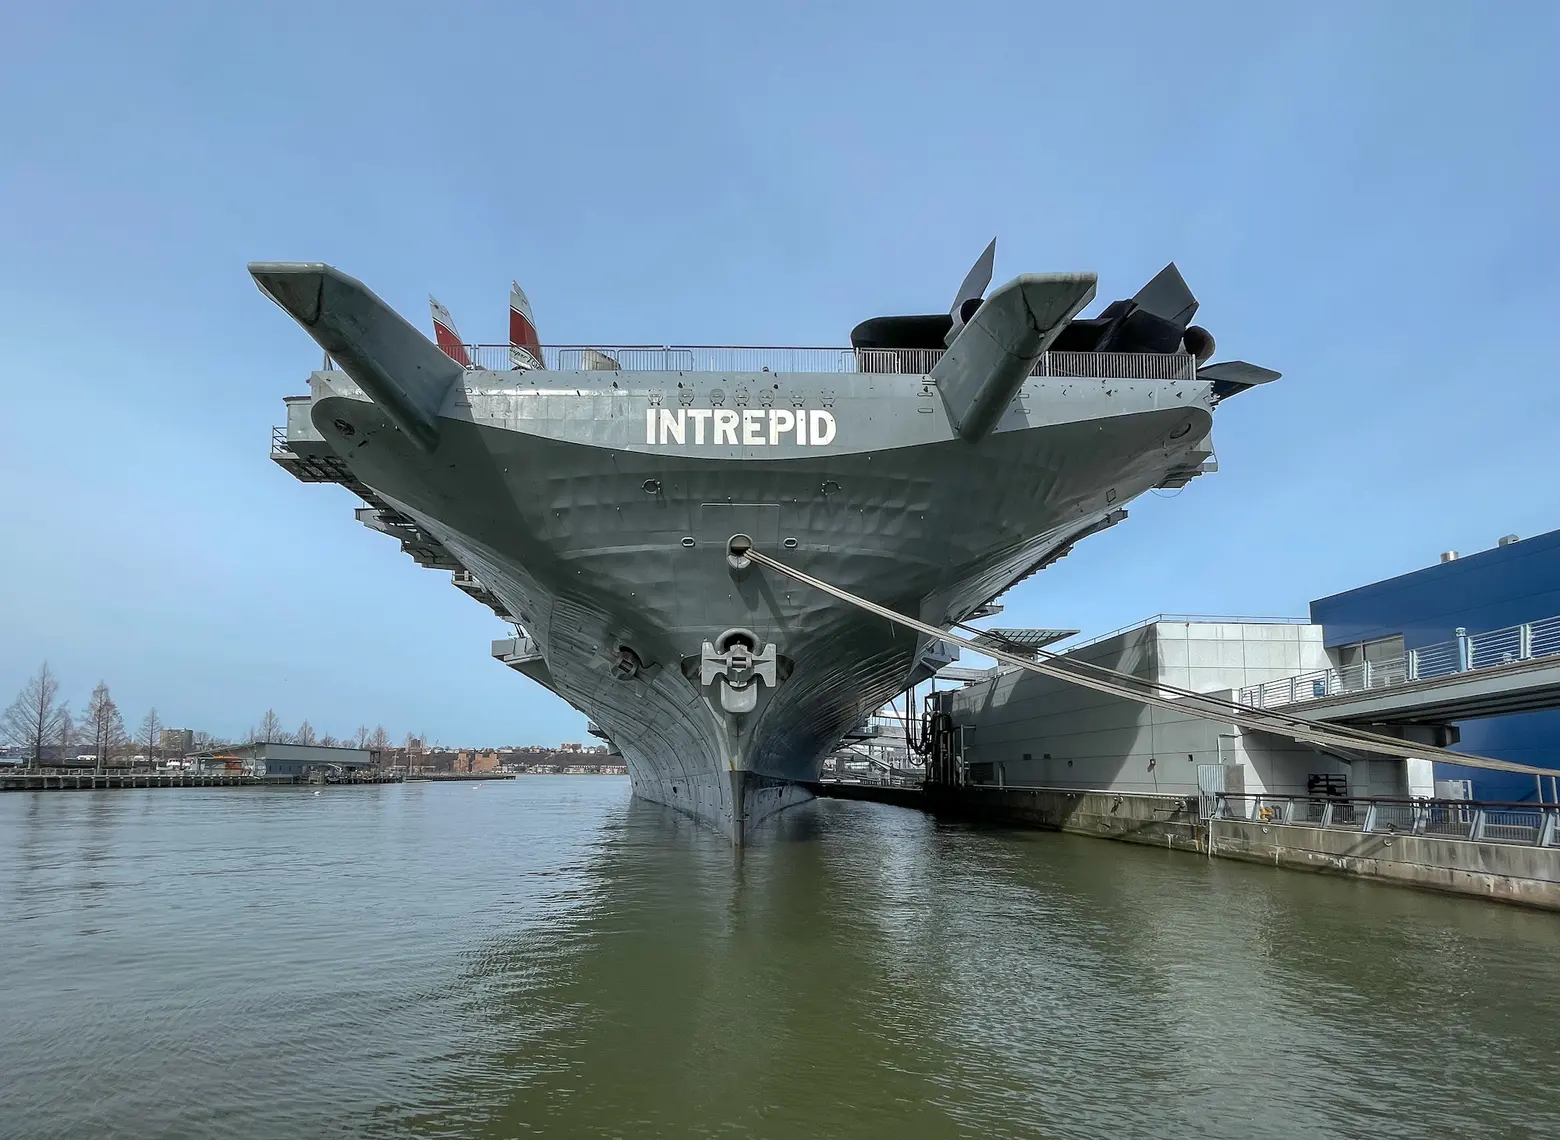 Intrepid Museum gets a branding makeover with updated name and logo